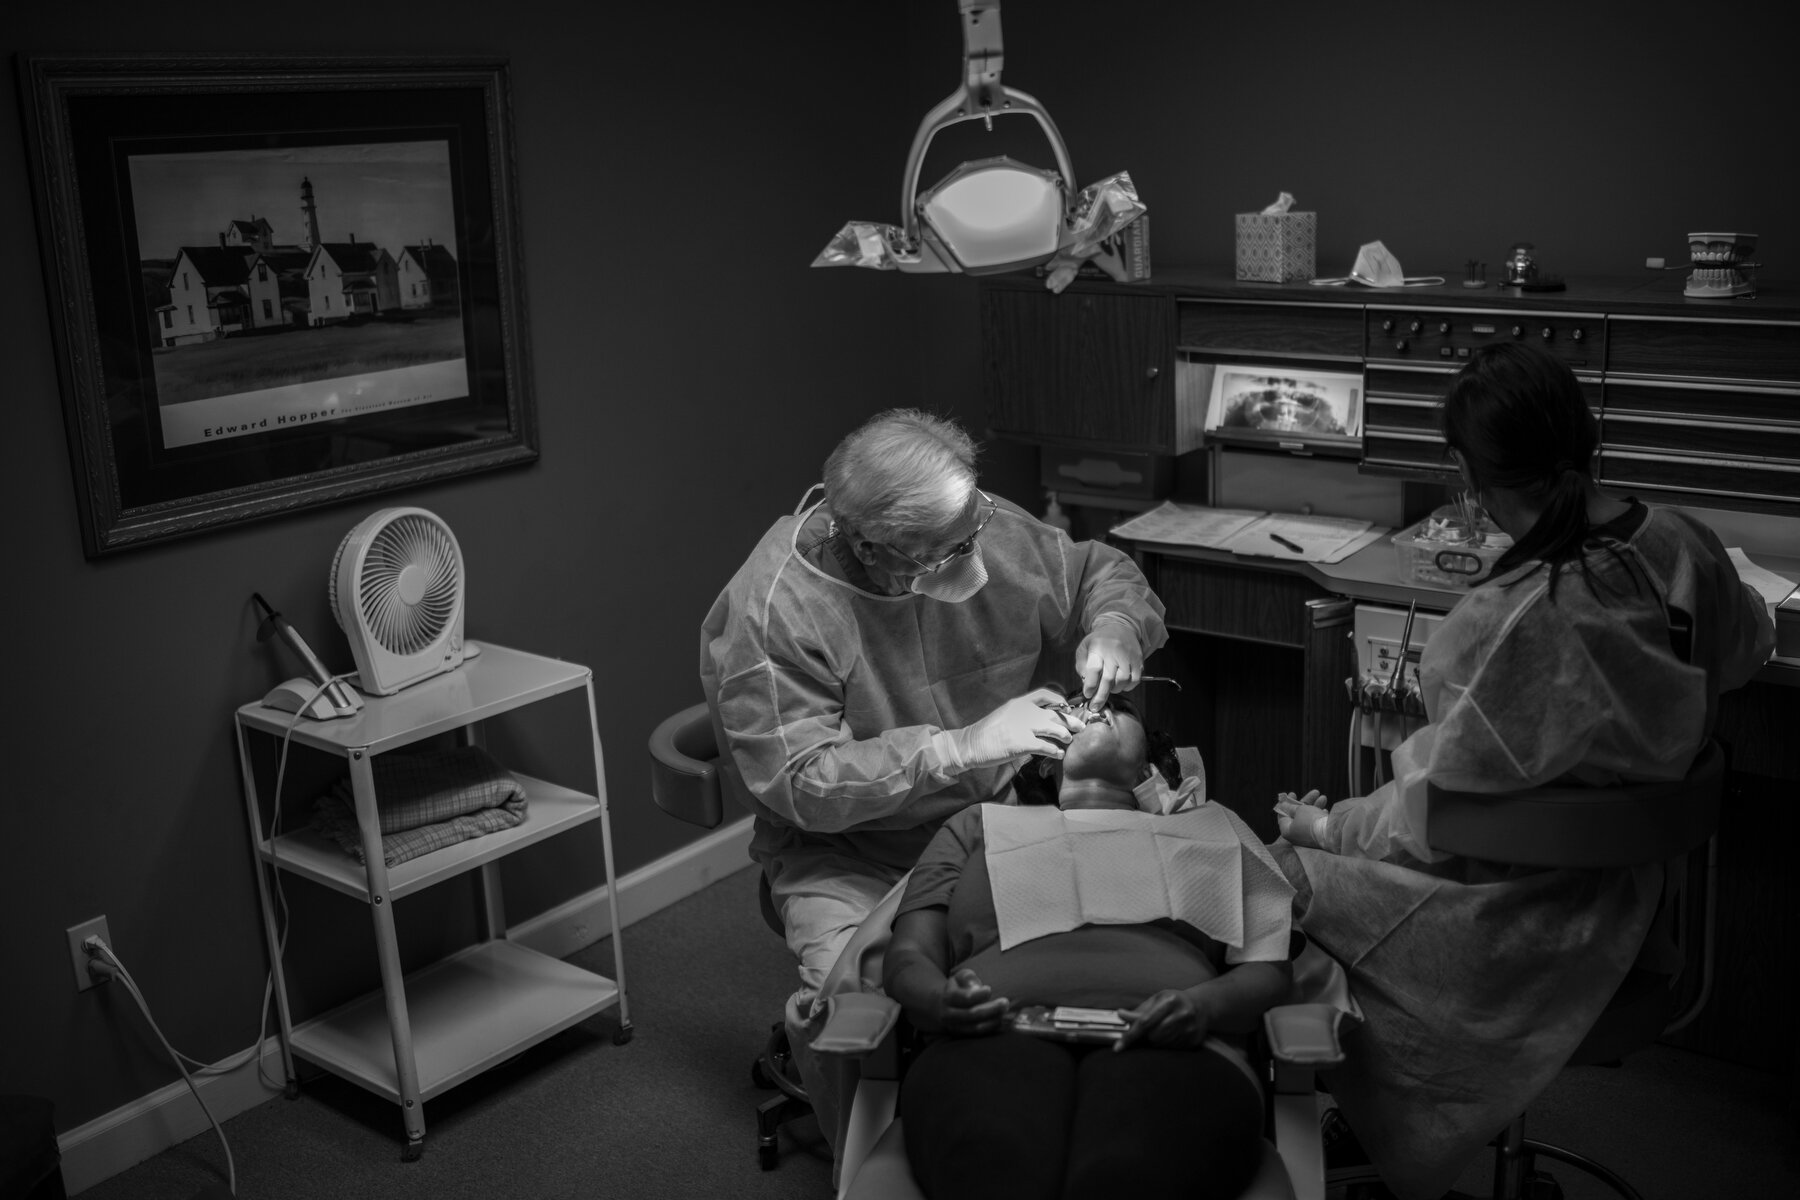  Dr. Goly Henry works a dental consultation for Nancy Coleman at his office in Marks, MS. Coleman had only three upper teeth remaining and was considering removing her teeth so she could get a full set of dentures to improve quality of life. Dr. Henr